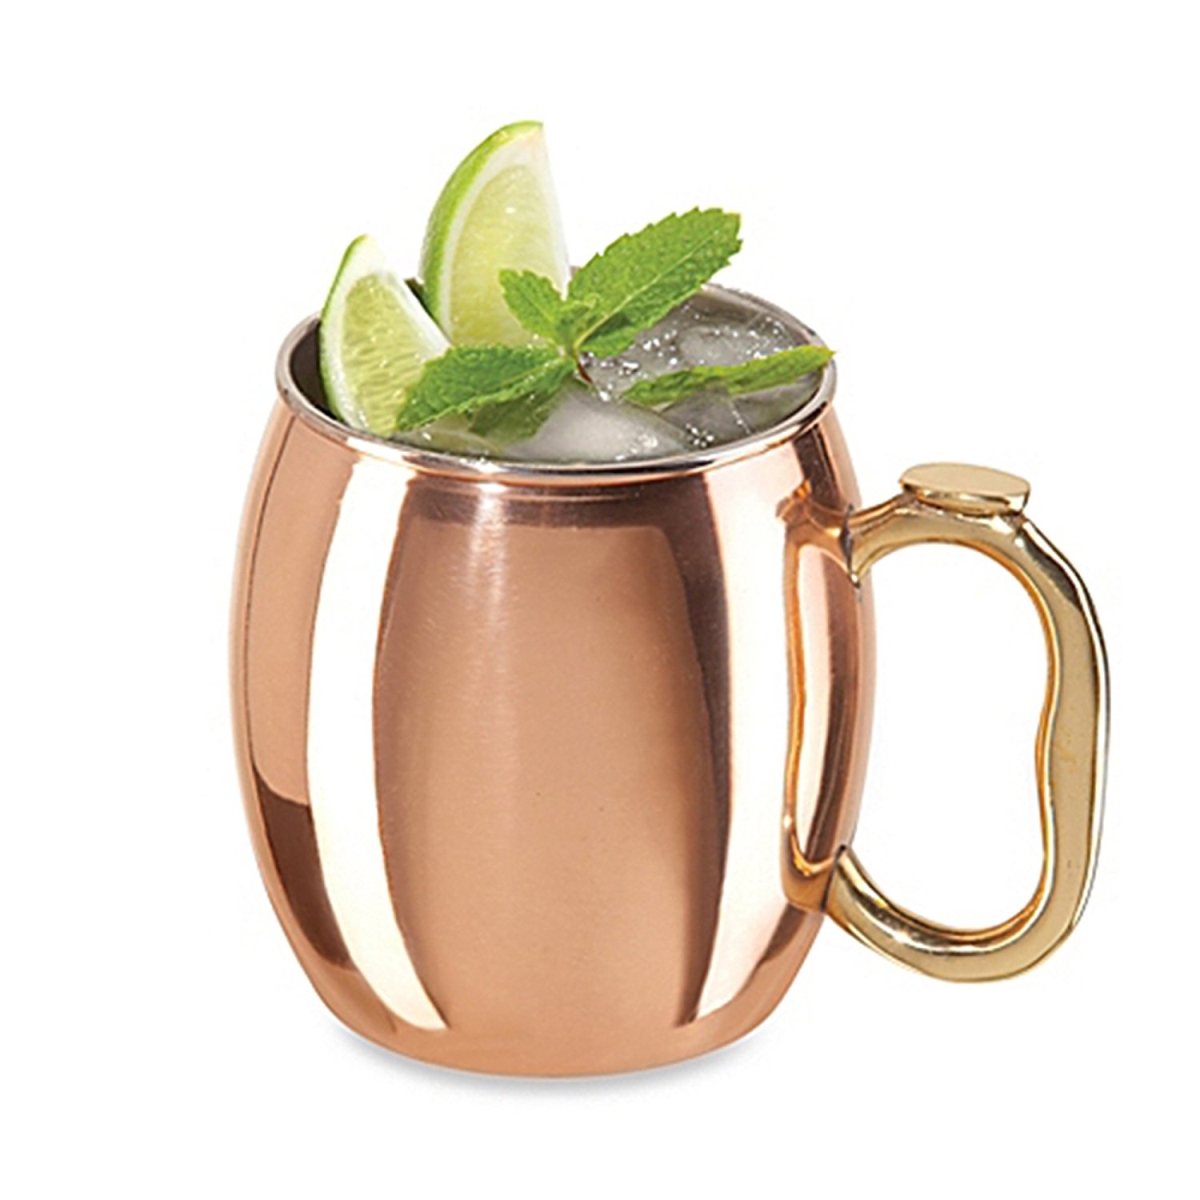 Mm-51 22 Oz Moscow Mule Mug Copper Plated